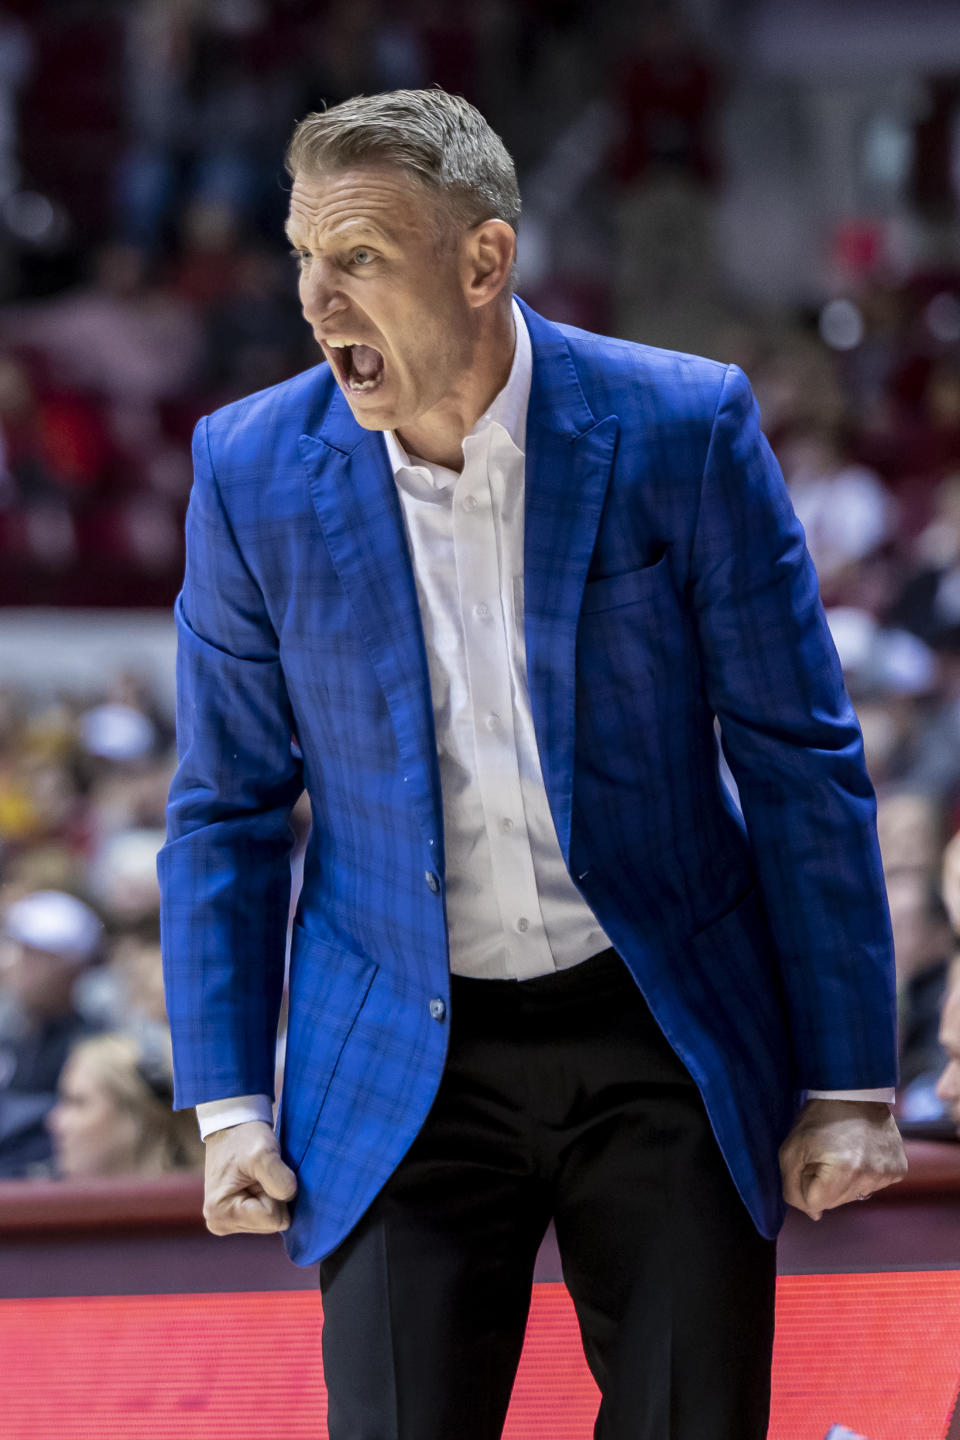 Alabama head coach Nate Oats reacts on the sideline during the first half of an NCAA college basketball game against Jacksonville State, Friday, Nov. 18, 2022, in Tuscaloosa, Ala. (AP Photo/Vasha Hunt)